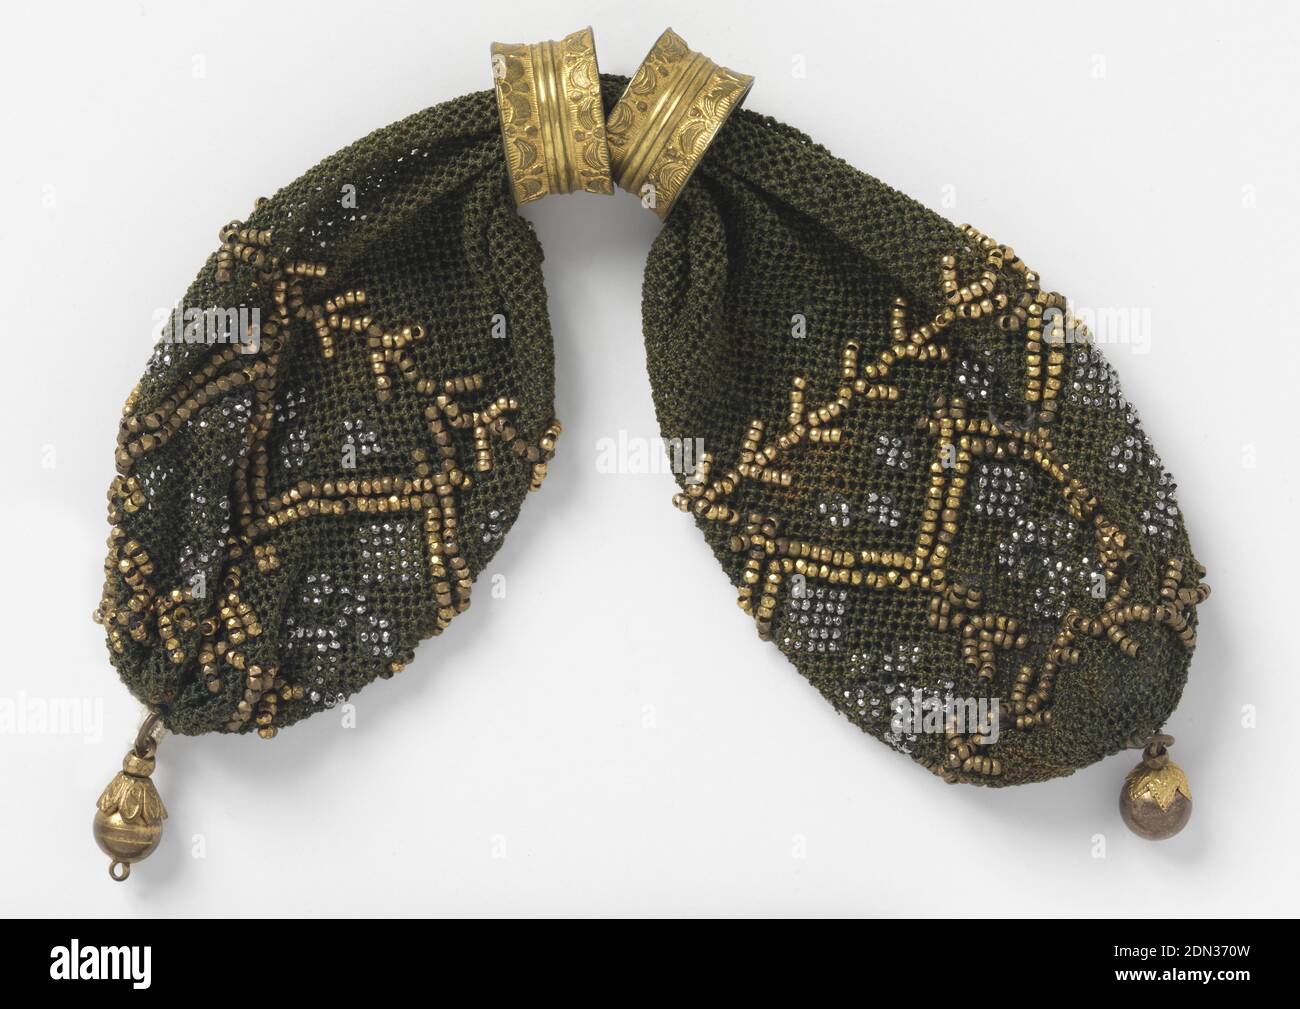 Miser's purse, Medium: silk, metal Technique: crocheted, Dark crocheted silk ornamented with gold beads in zigzag and stylized branch pattern. Accents of very small cut steel beads. Two gold rings control side opening; gold ball drops at either end., France, early 19th century, costume & accessories, Miser's purse Stock Photo